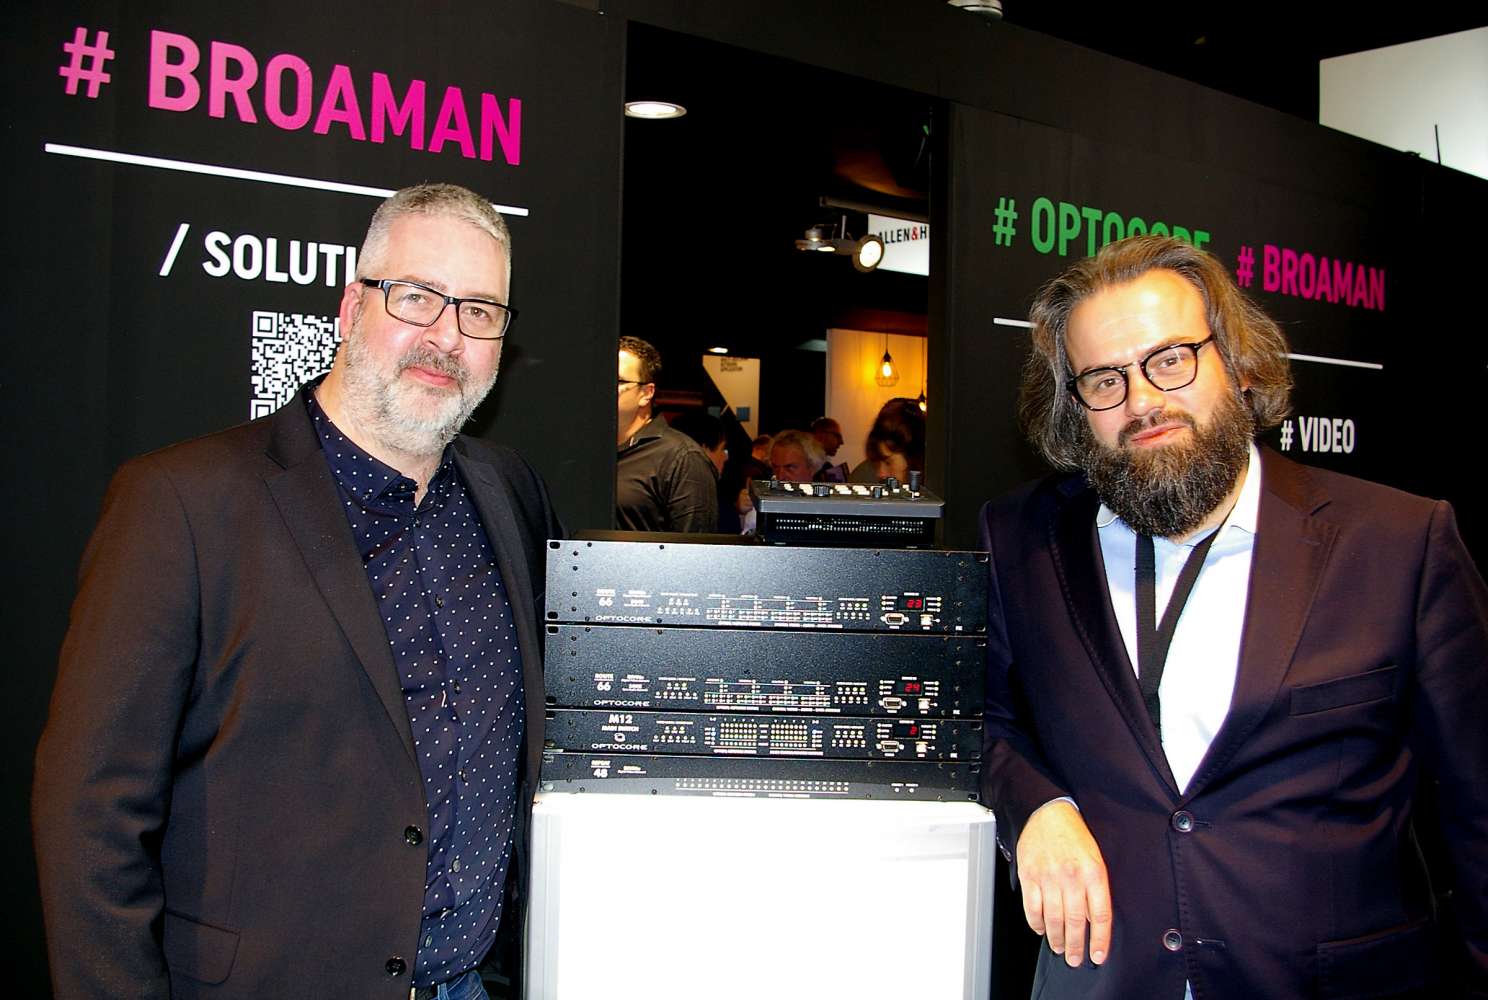 Danmon / Soundware, represented by Magnus Wiborg, with Dawid Somló of Optocore / BroaMan